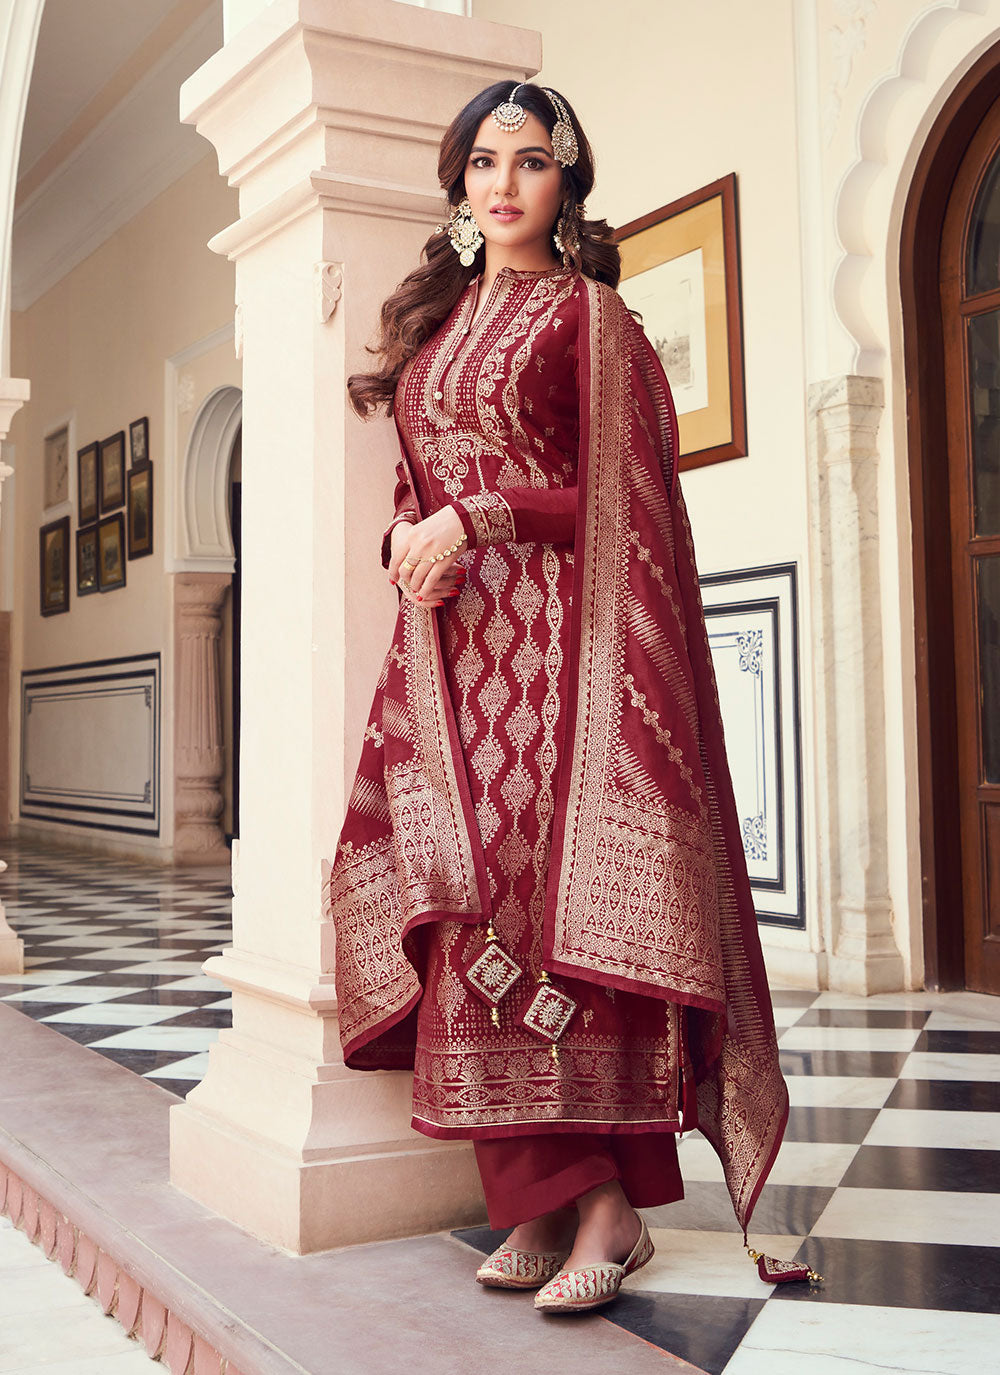 Plain Viscose Rayon Pakistani Suit in Red